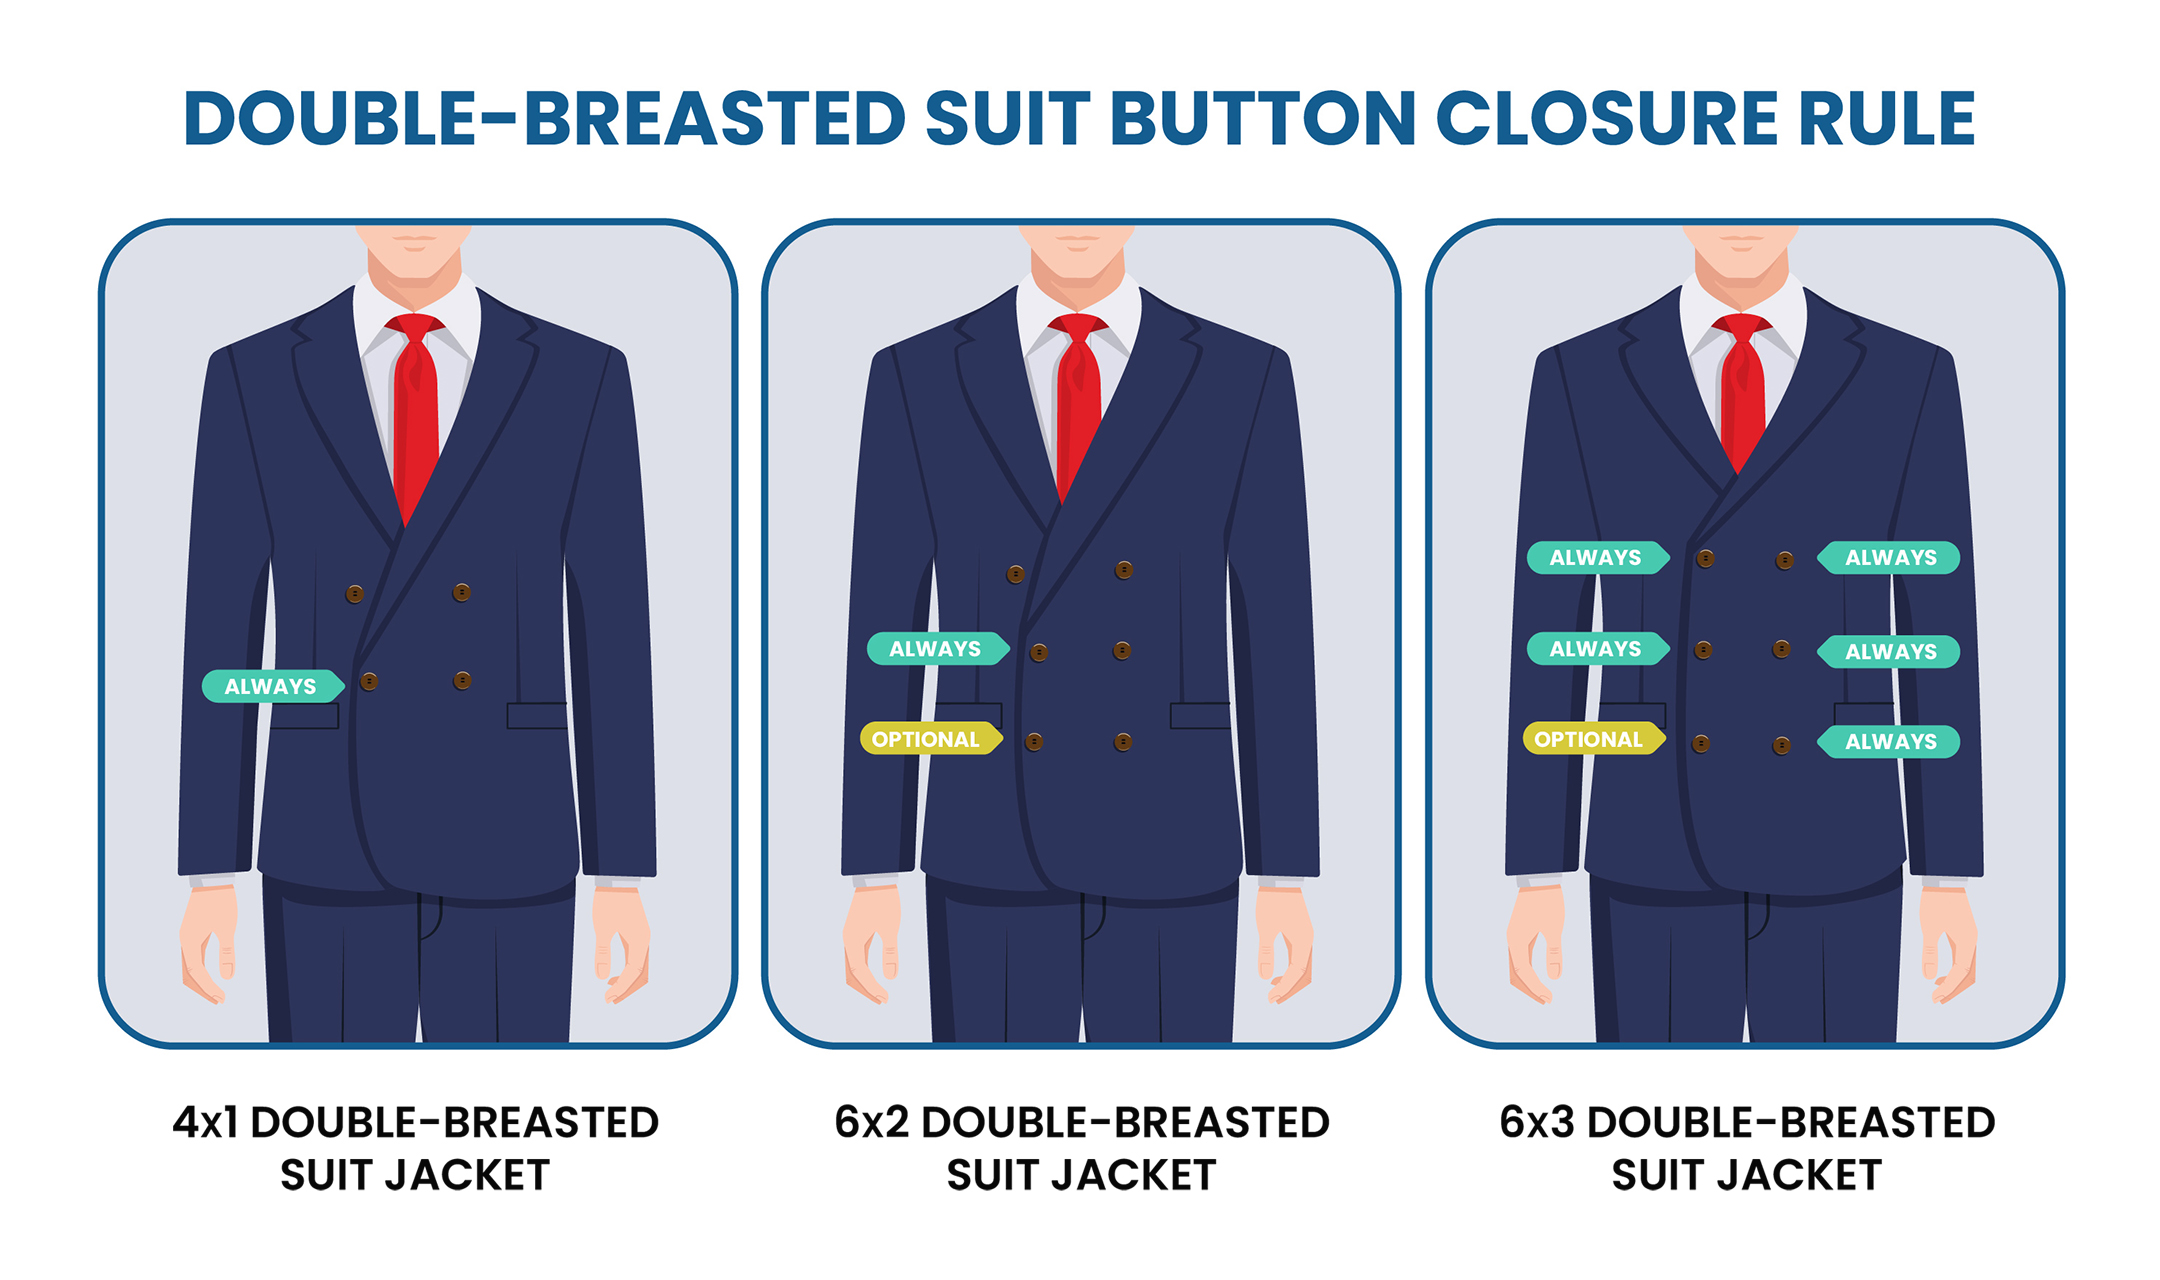 Double Breasted Suits vs Single Breasted Suits – The Dark Knot